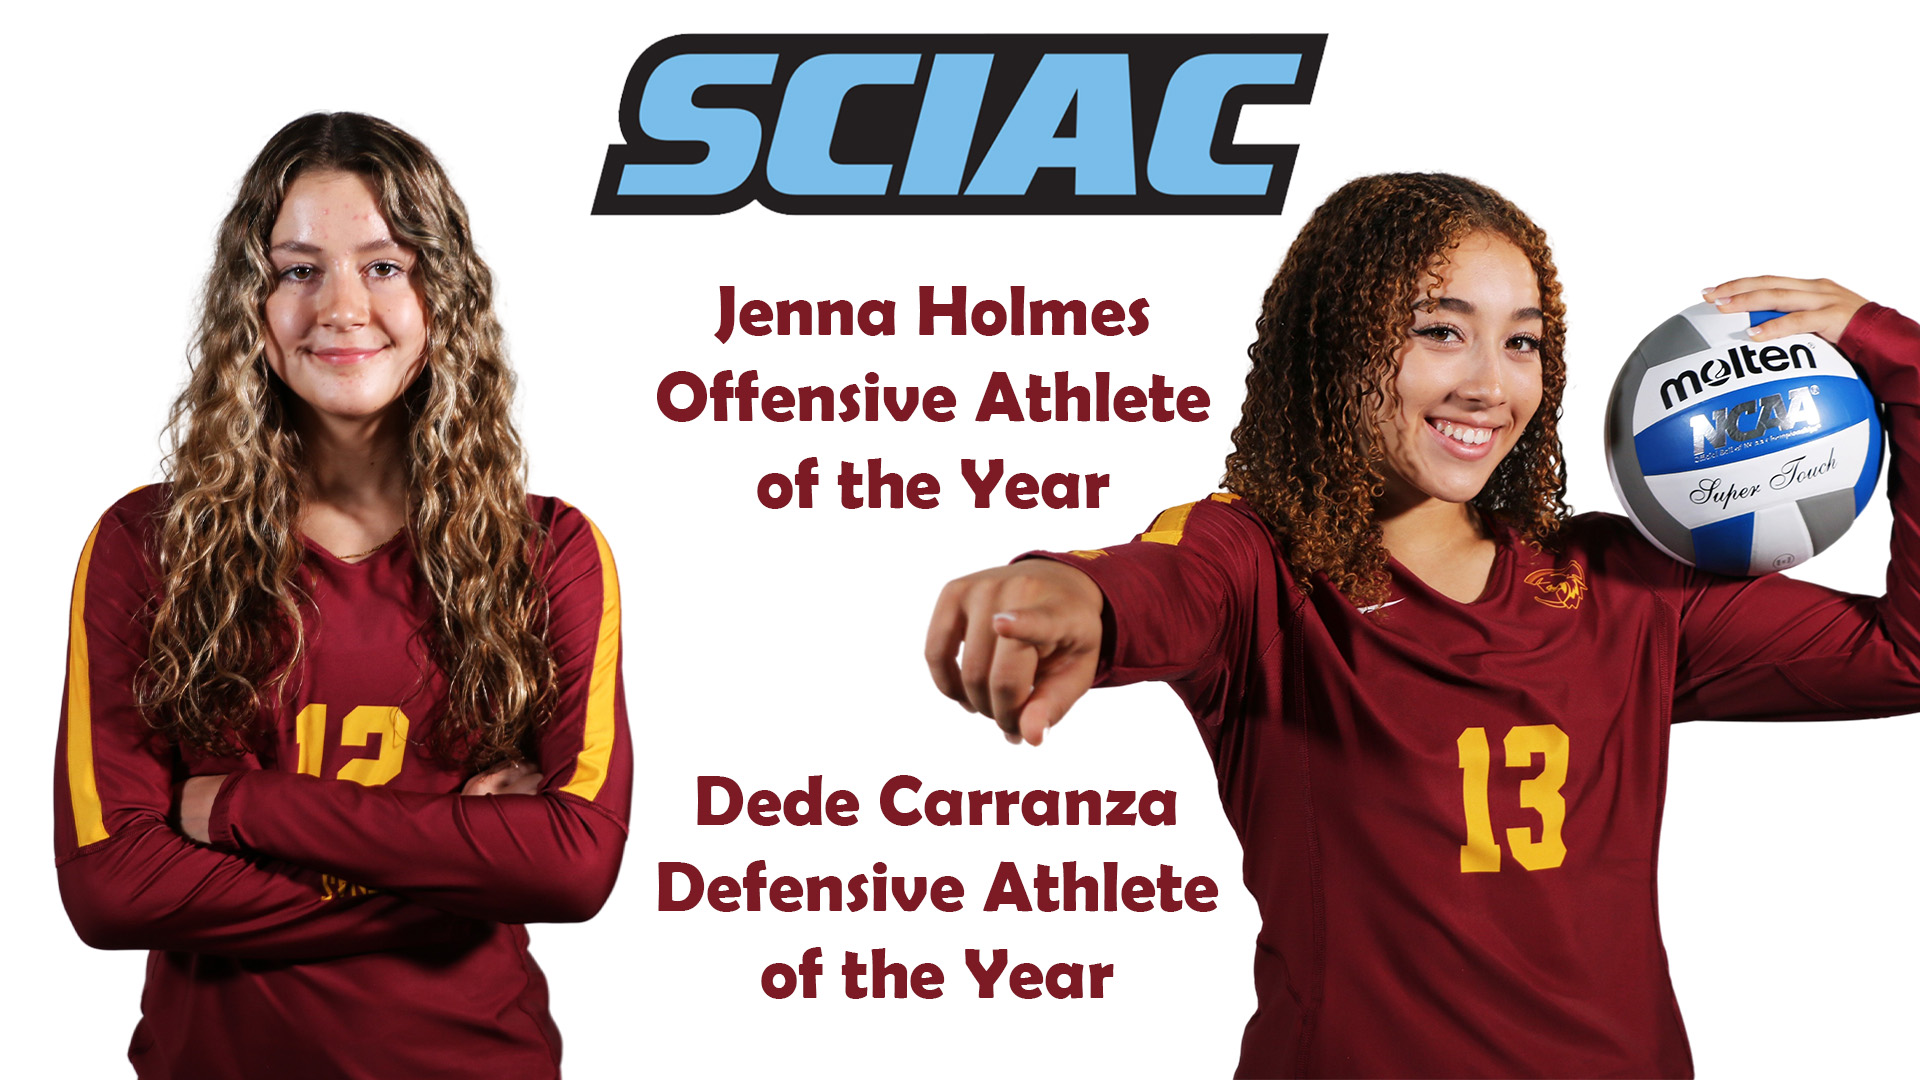 posed shots of Jenna Holmes and Dede Carranza with the SCIAC logo